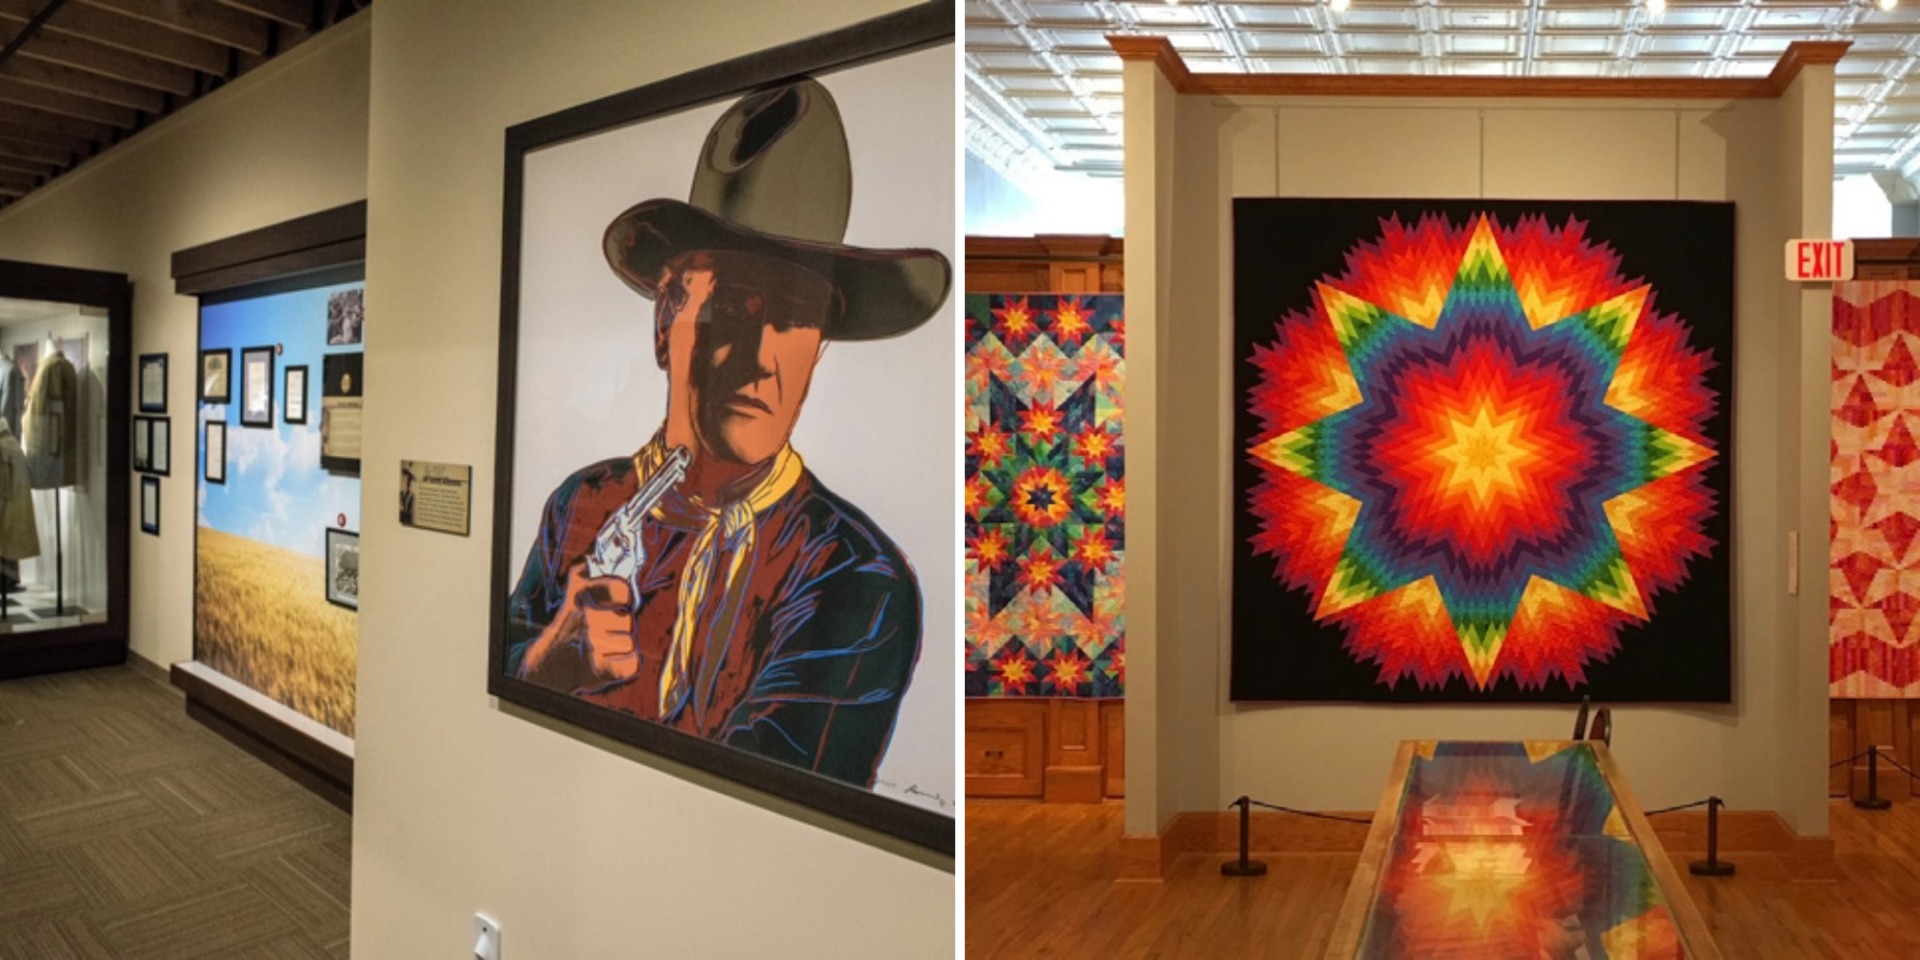 Displays from the John Wayne Birthplace & Museum and Iowa Quilt Museum.